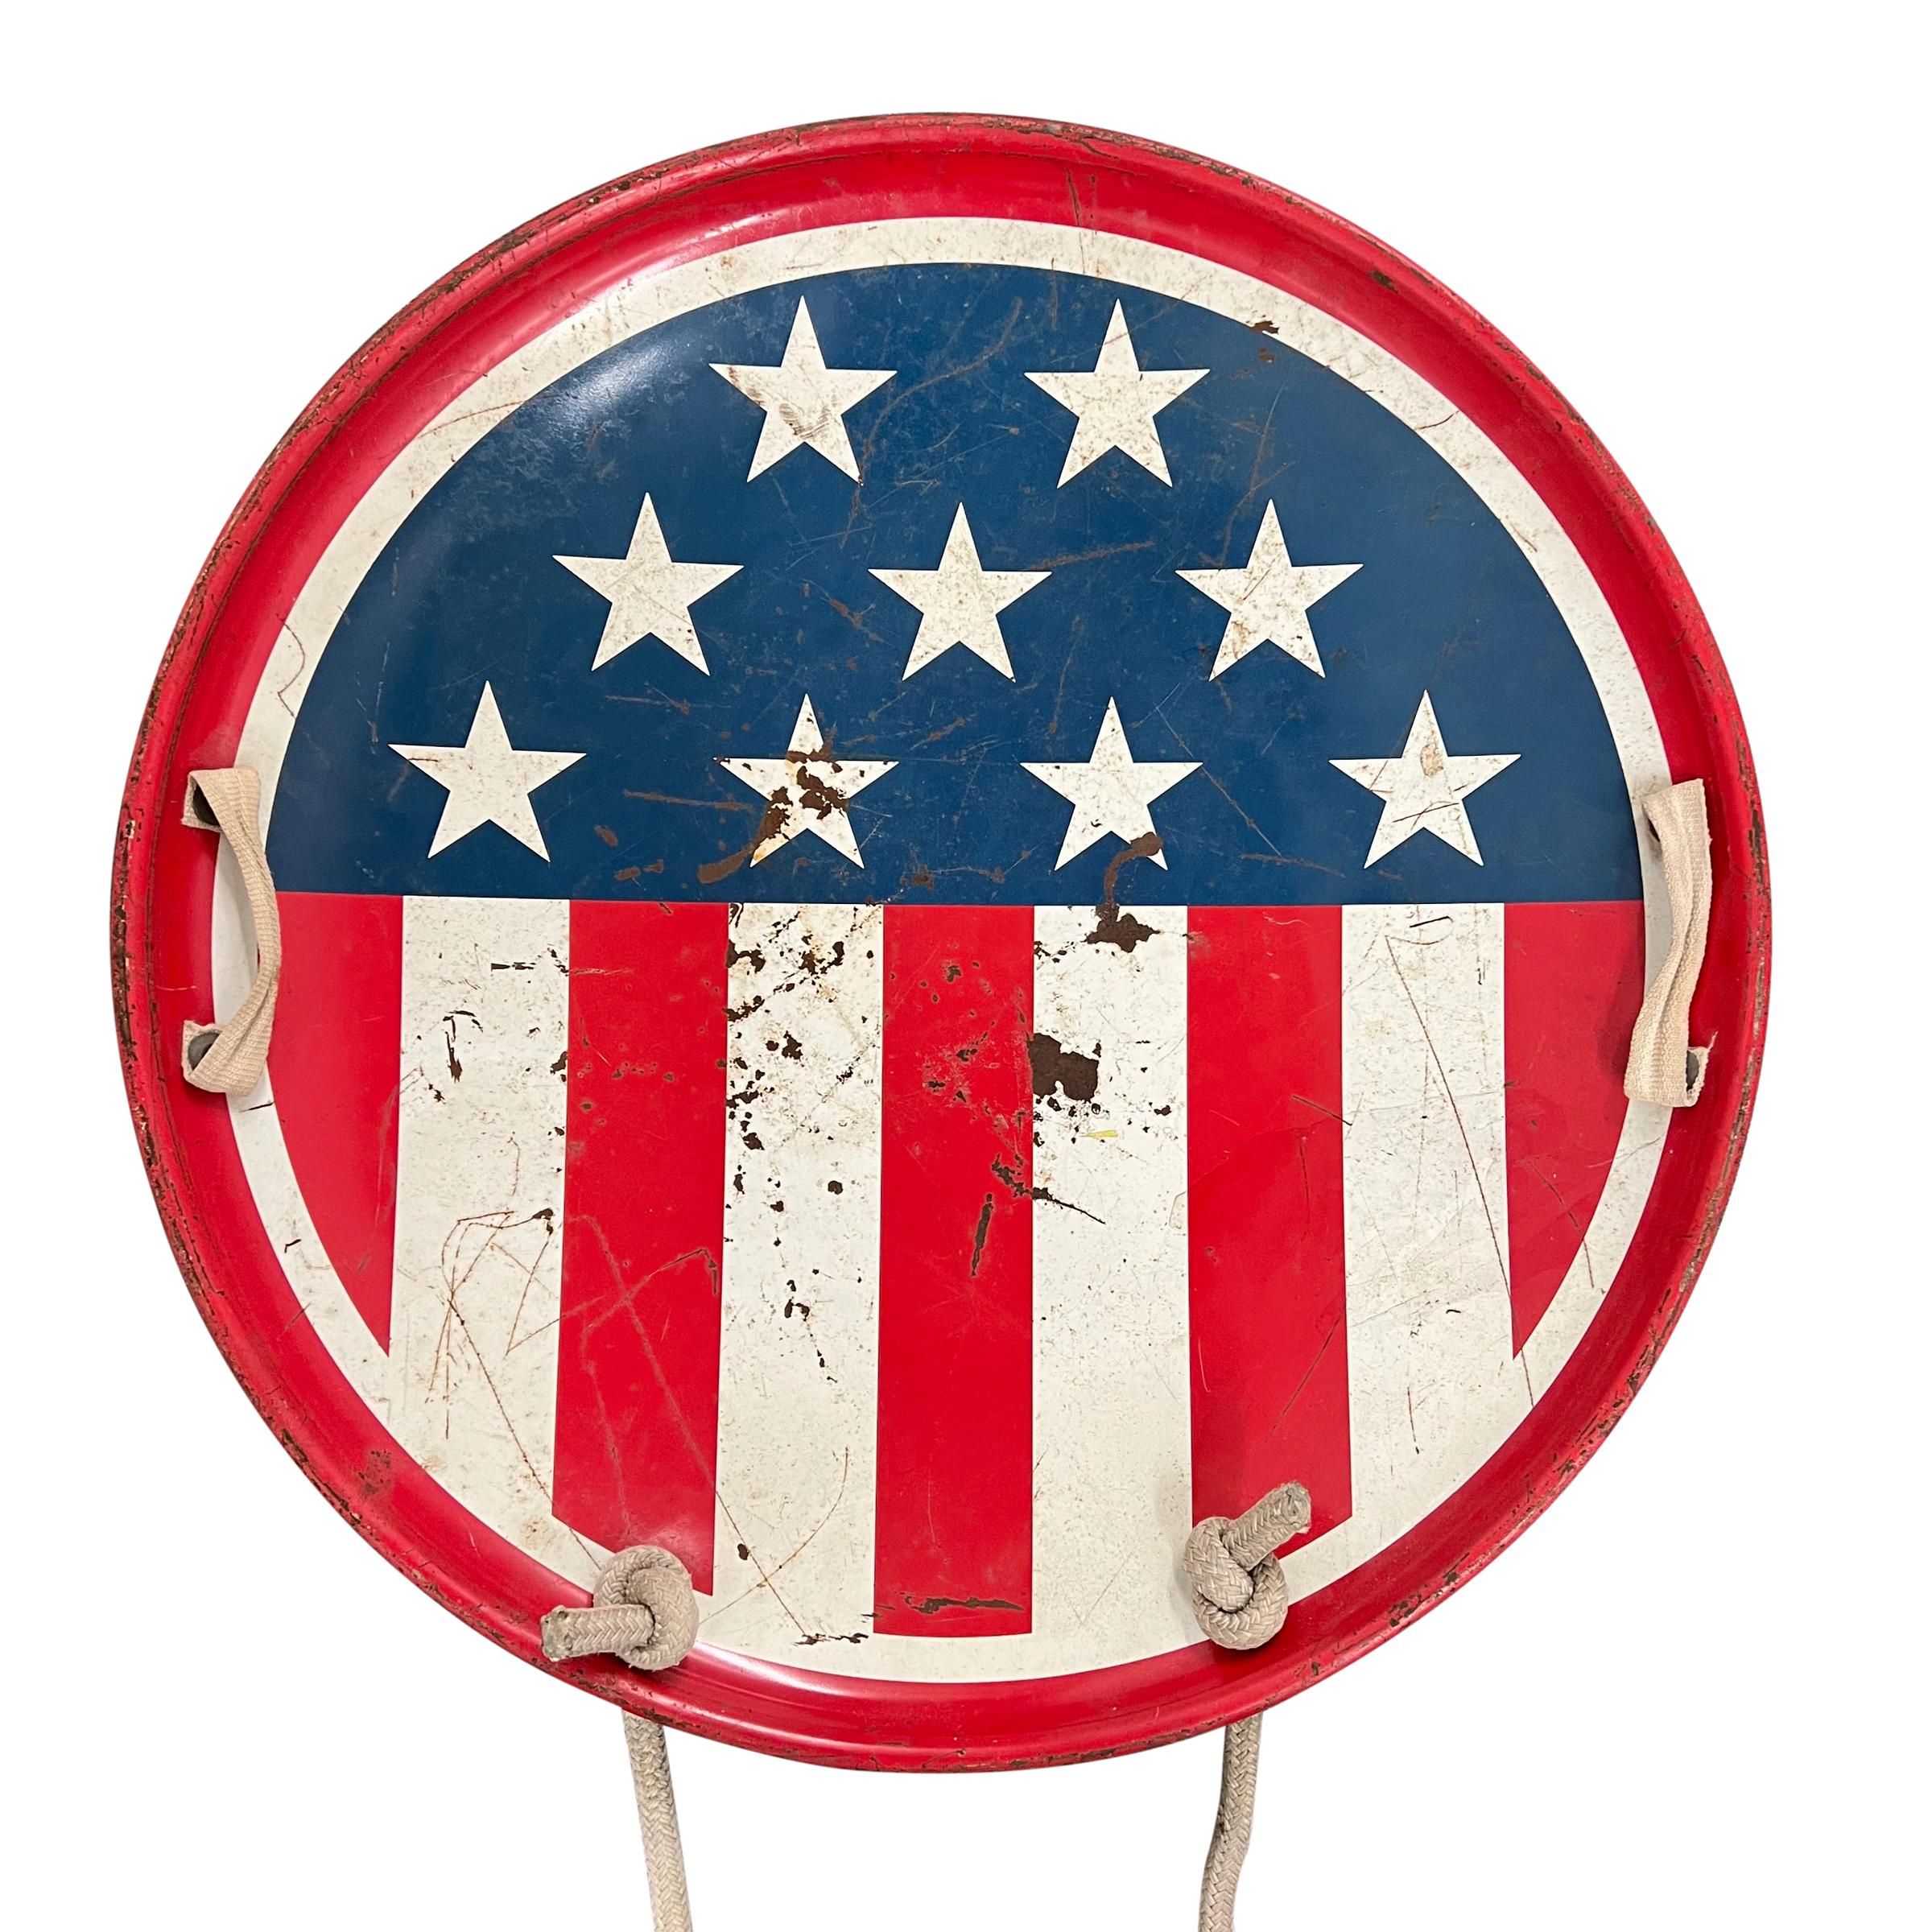 Mid-20th Century Vintage American Flag Saucer Sled on Custom Wall Mount For Sale